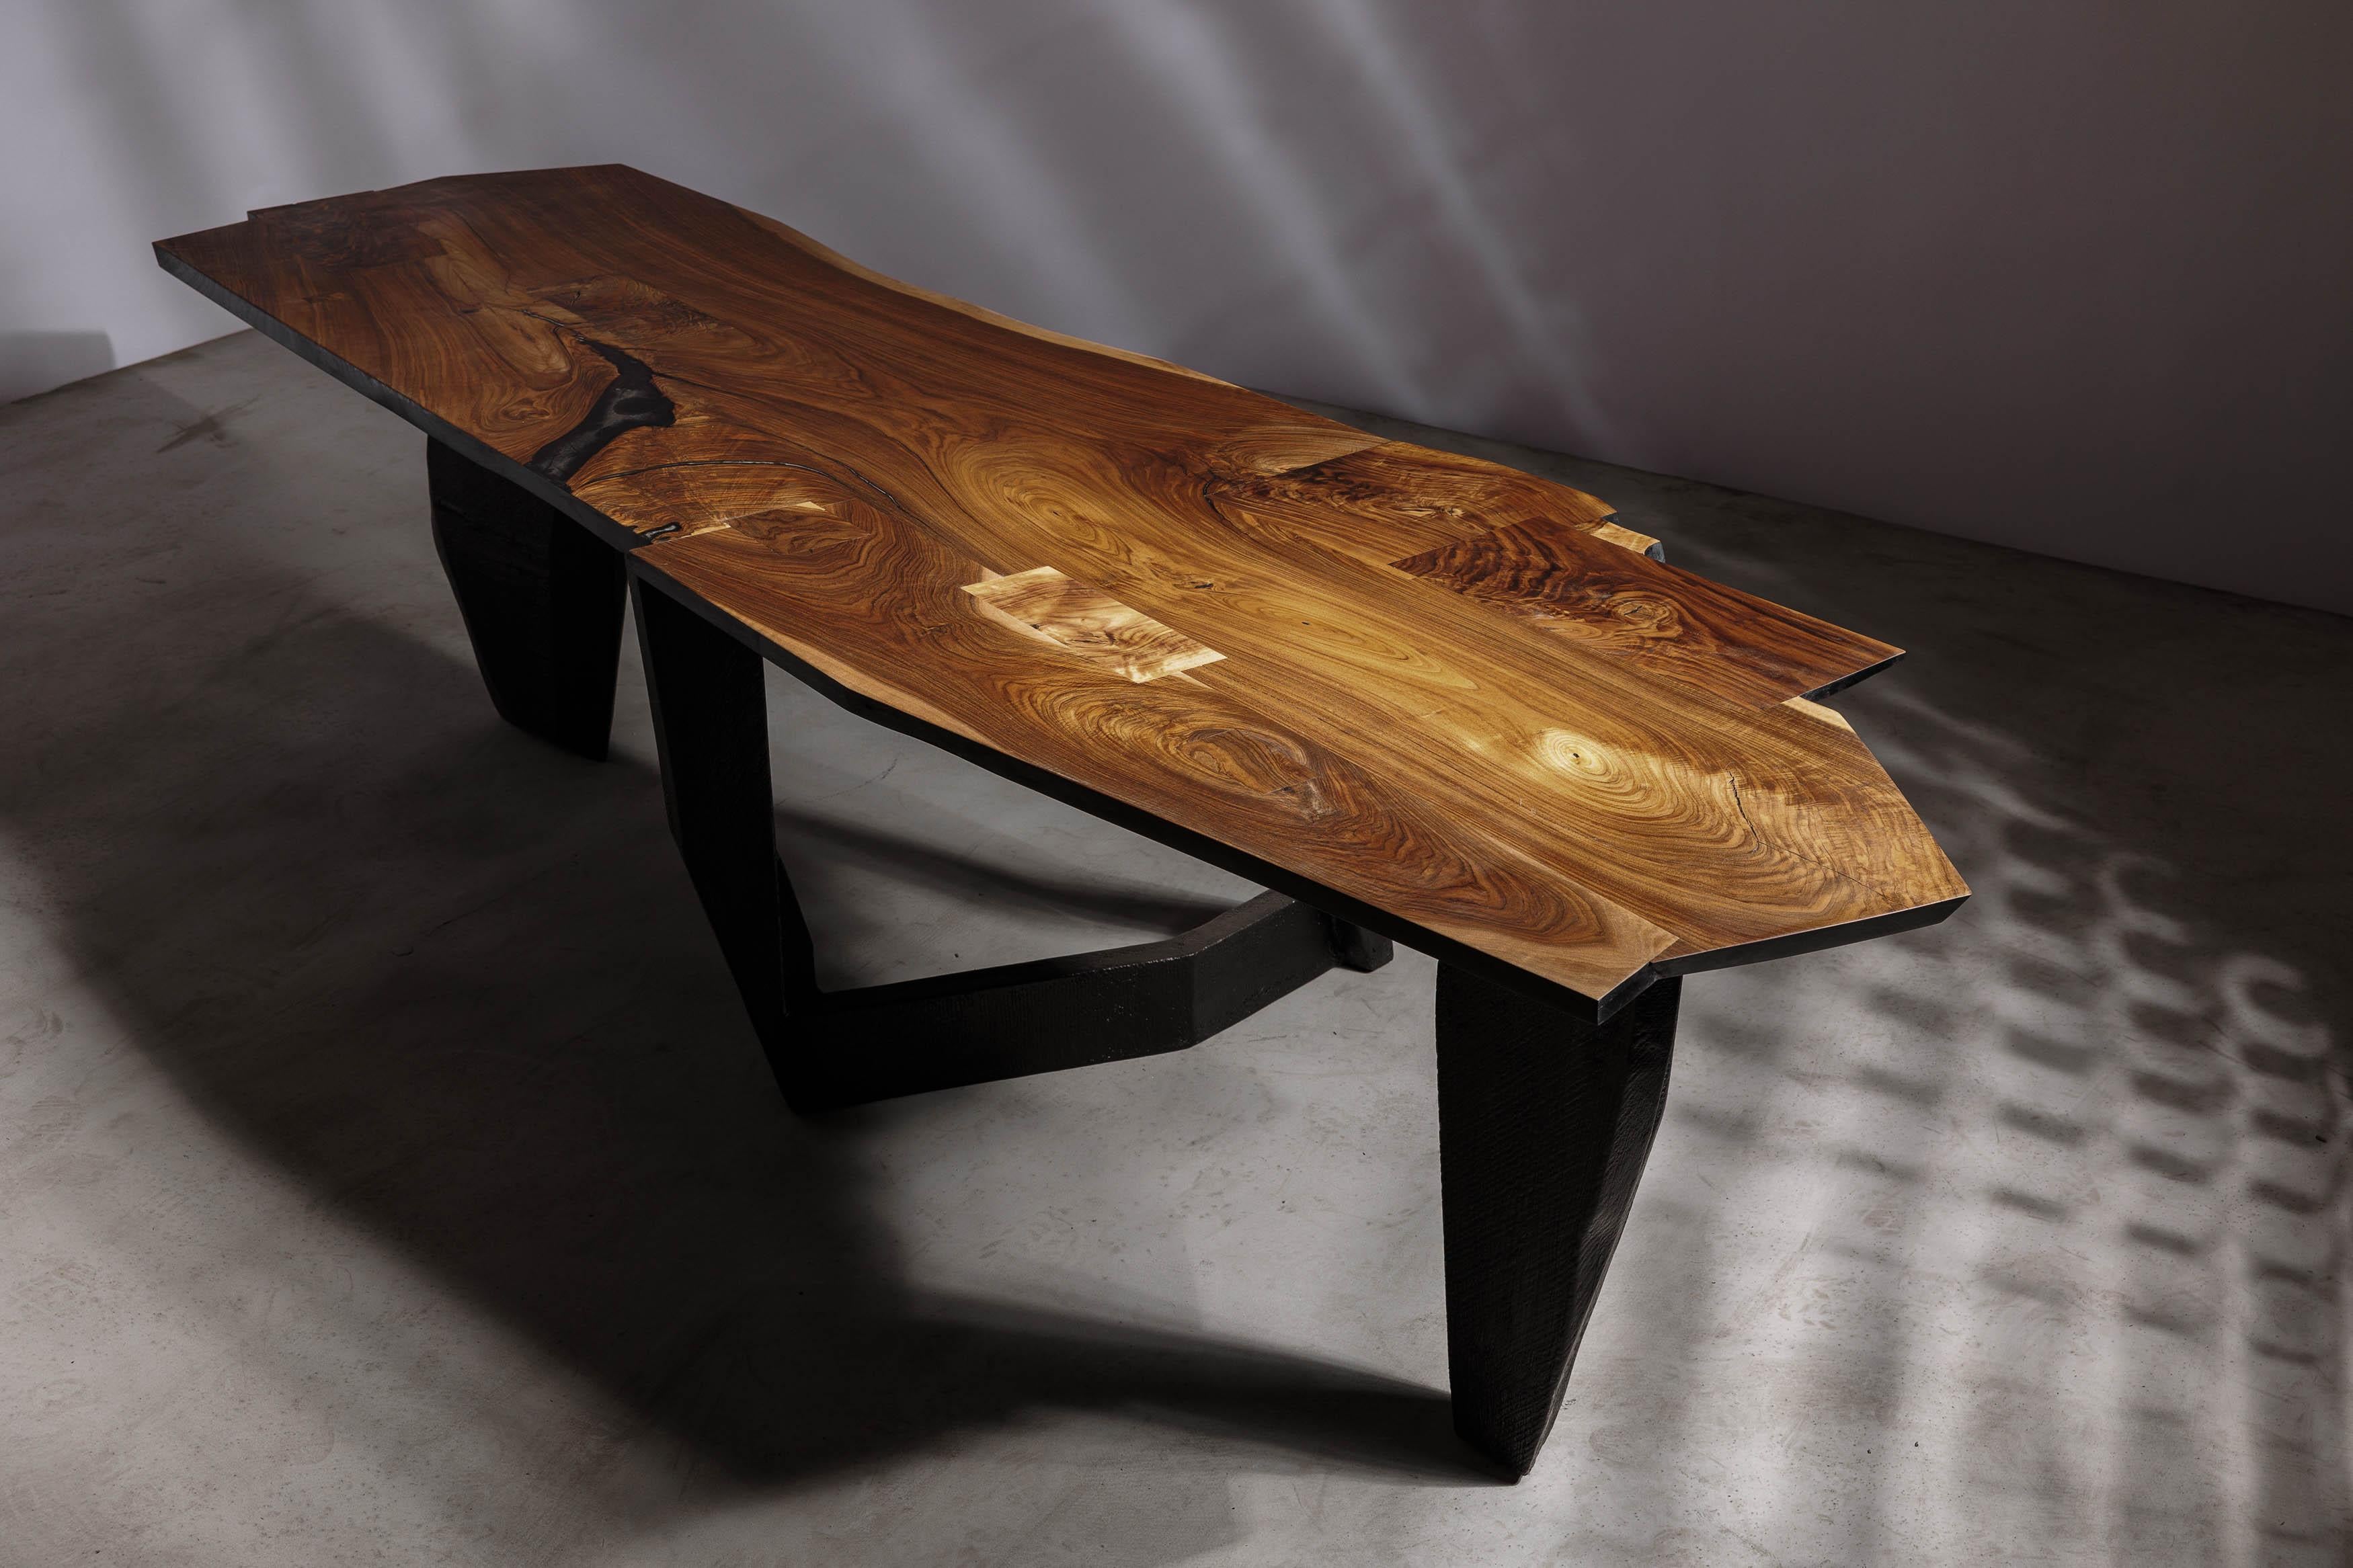 EM202 dining table by Eero Moss
One of a kind
Dimensions; W 308 x D 90 x H 78 cm
Materials: Walnut, ash, fiberglass, acrylic resin, India ink.
Finish: Natural oils.

18 Brut Collection

The latest collection by the artist is a tribute to the